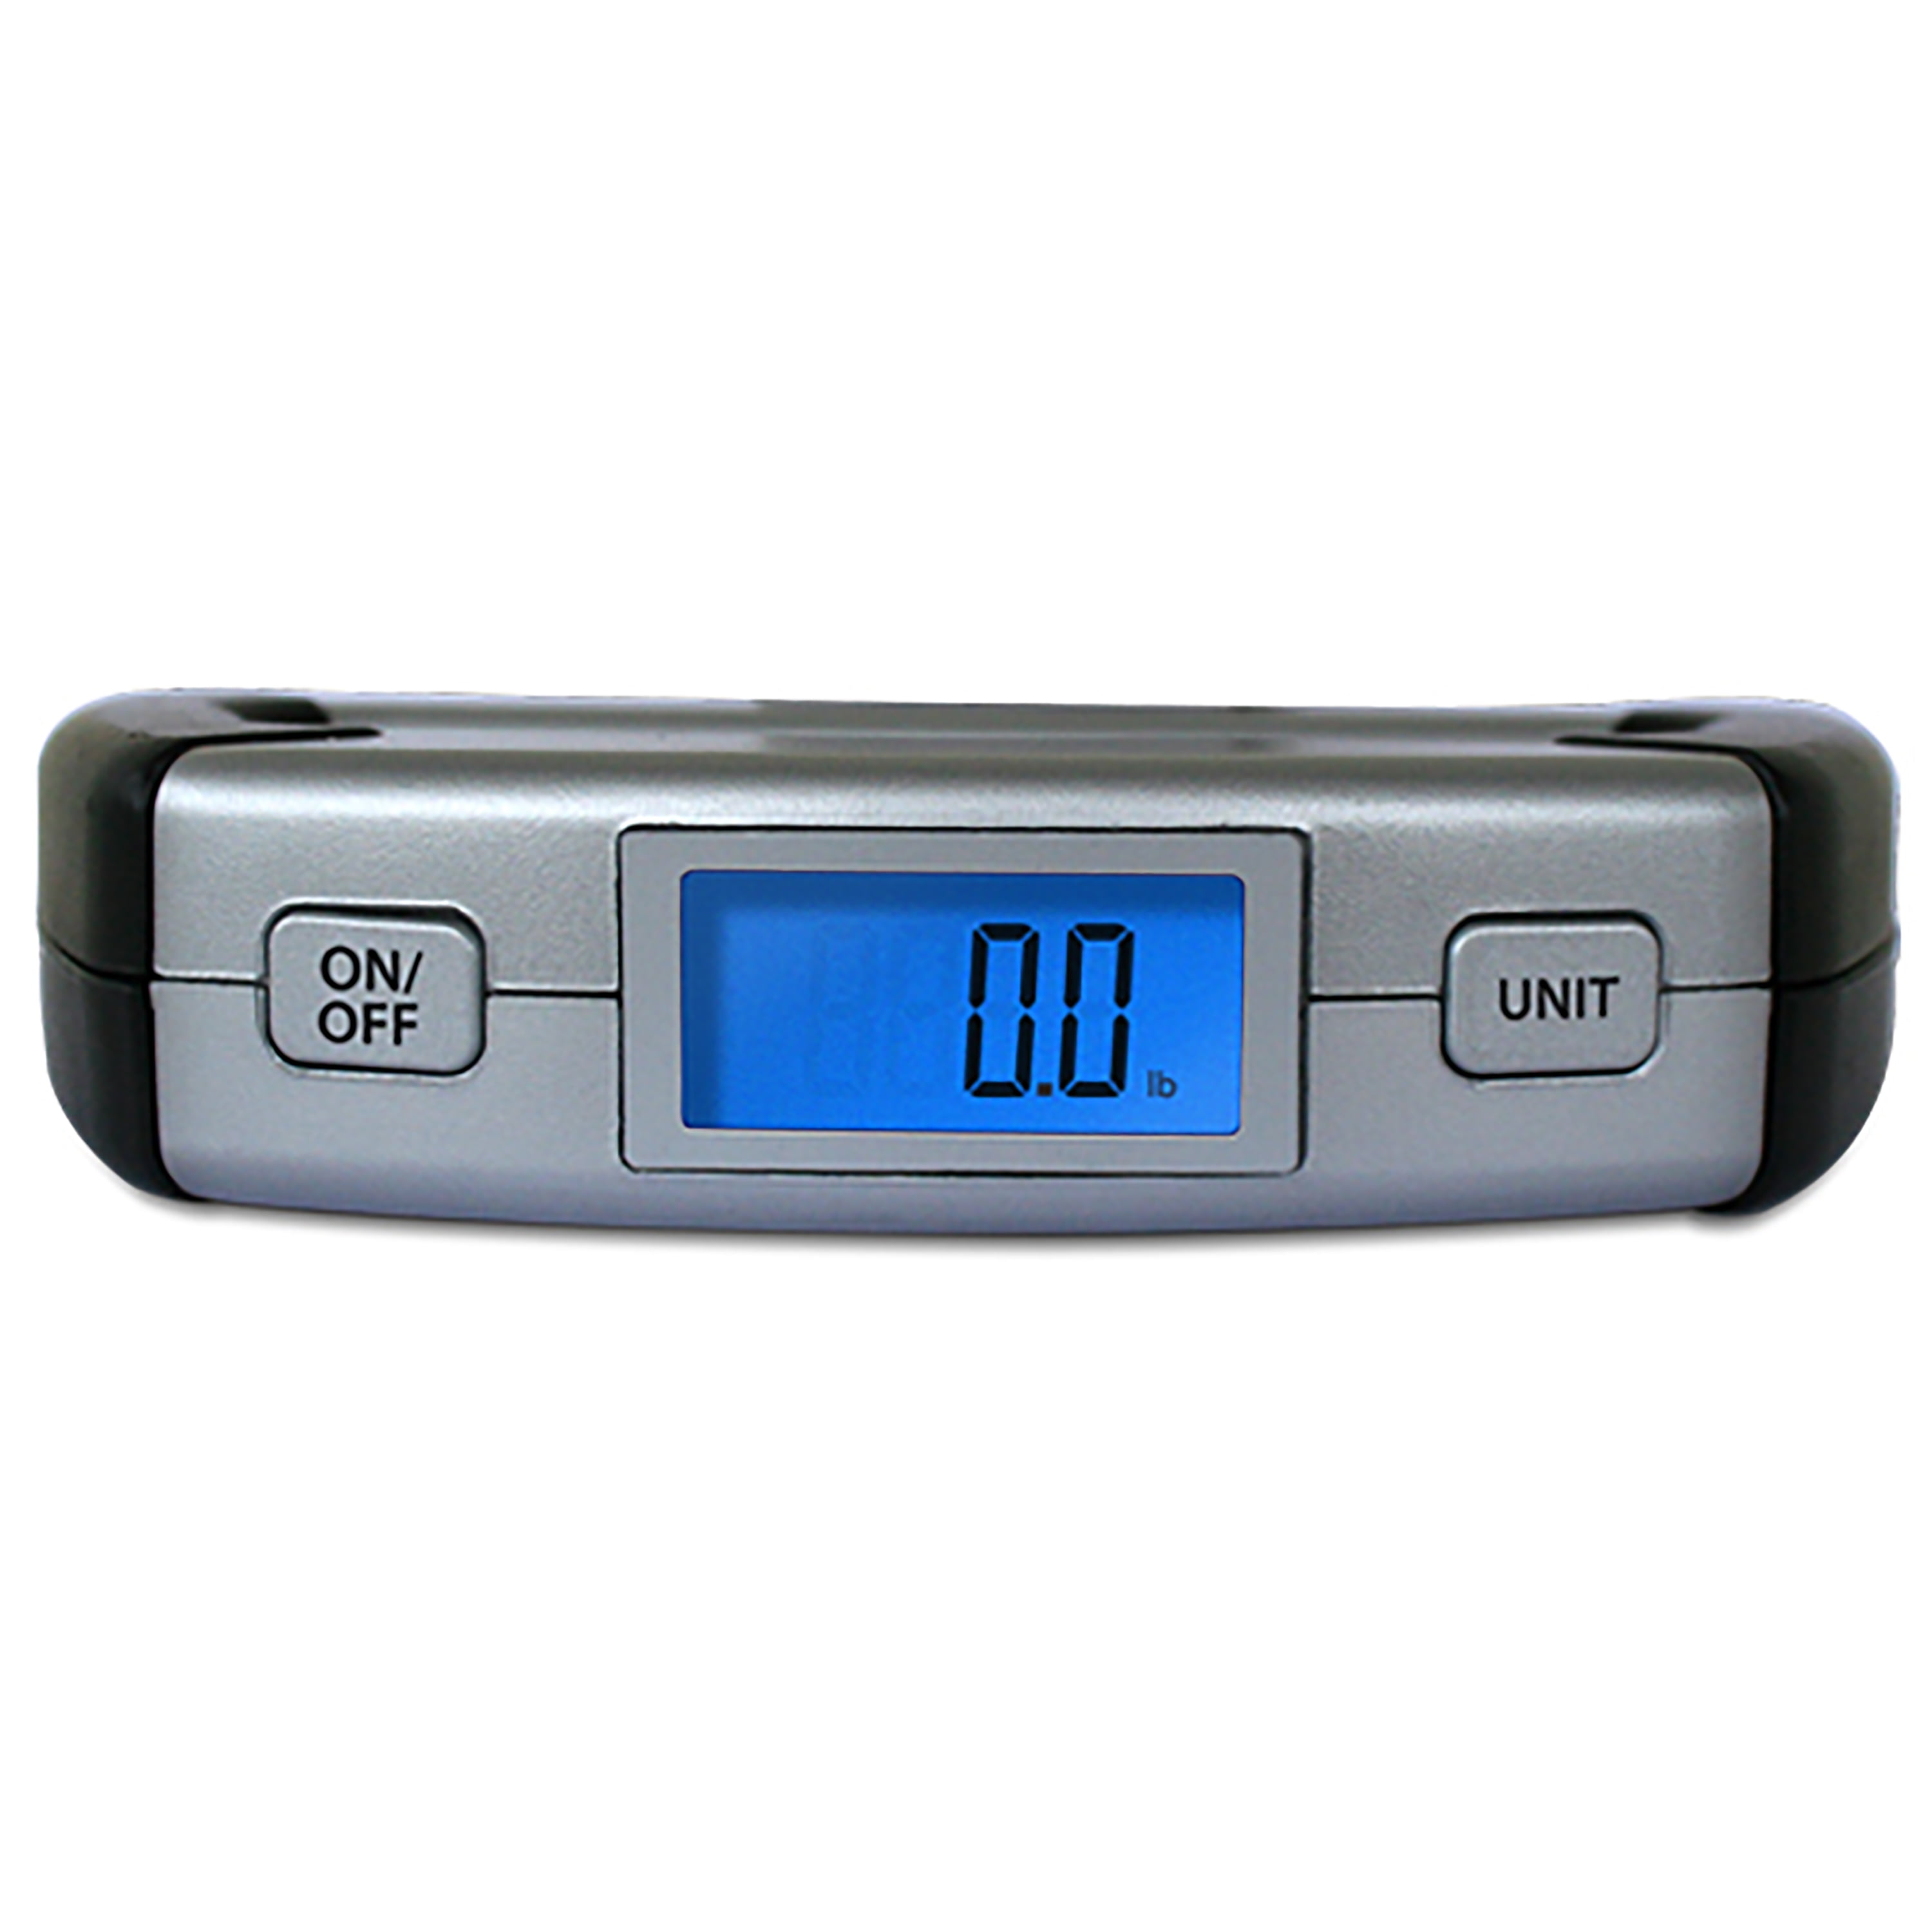 7 Reasons Every Business Traveler Needs a Luggage Scale – Eat Smart